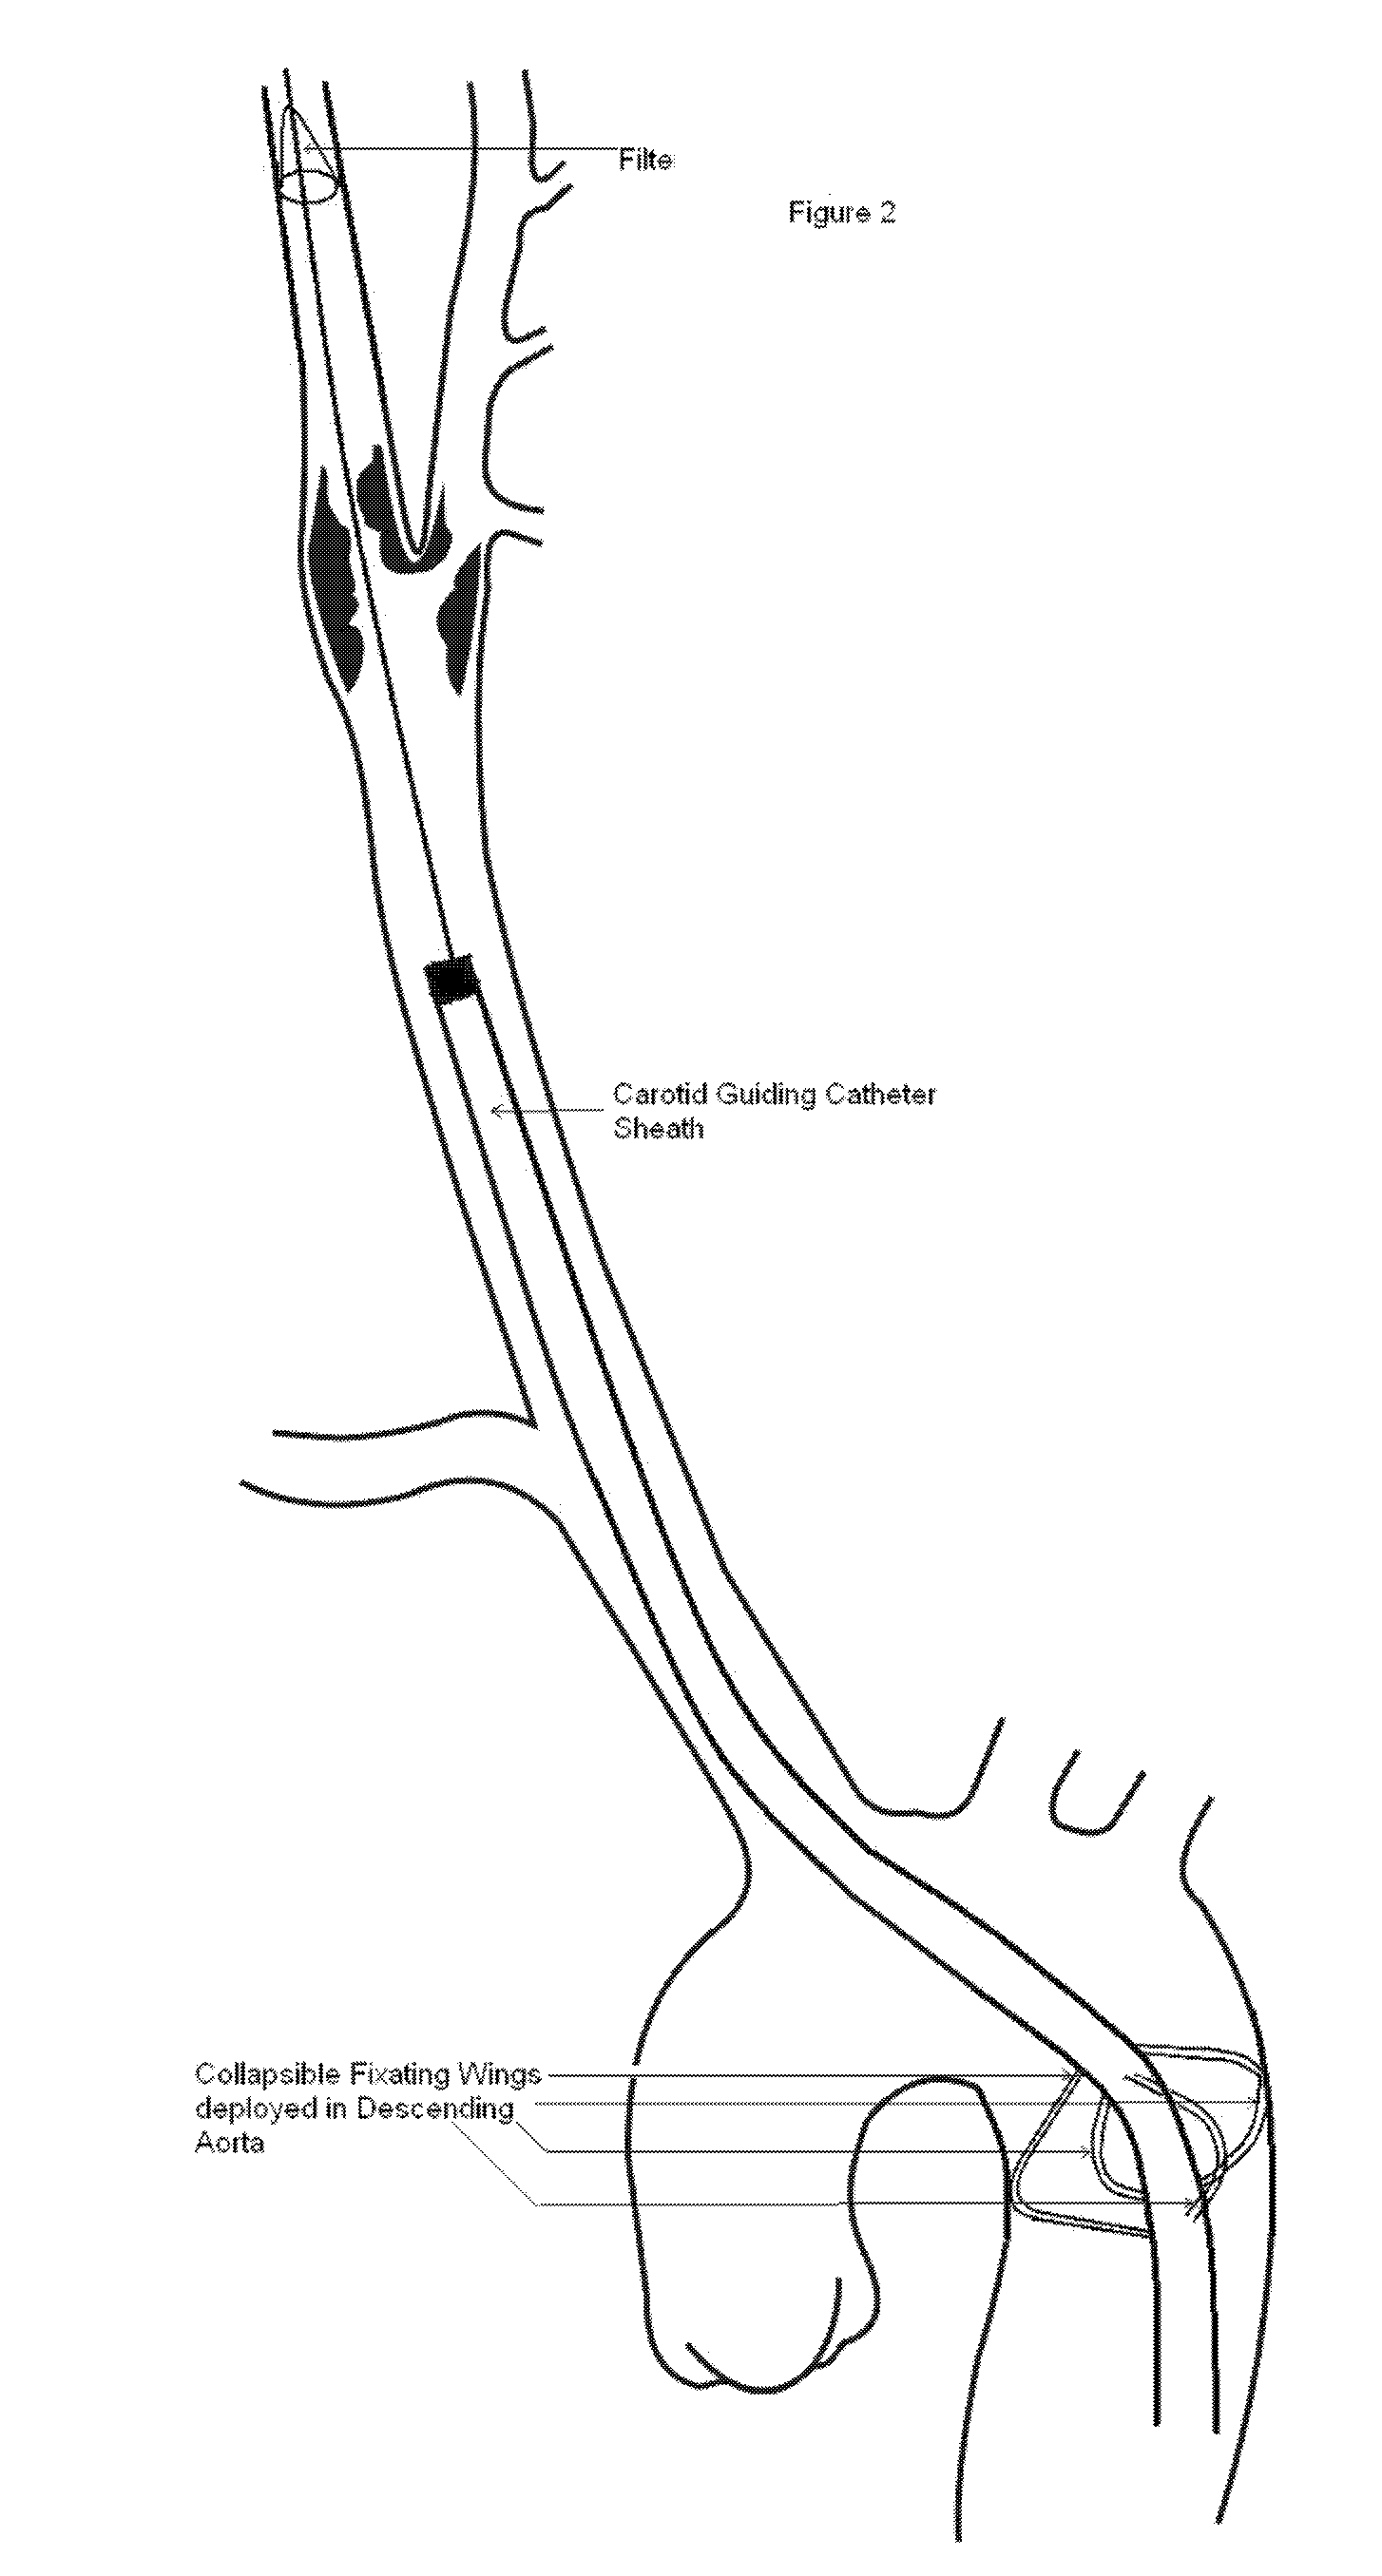 Carotid guiding catheter (sheath) for carotid percutaneous intervention/stenting with internal fixation device to prevent migration of the Carotid guiding catheter (sheath)